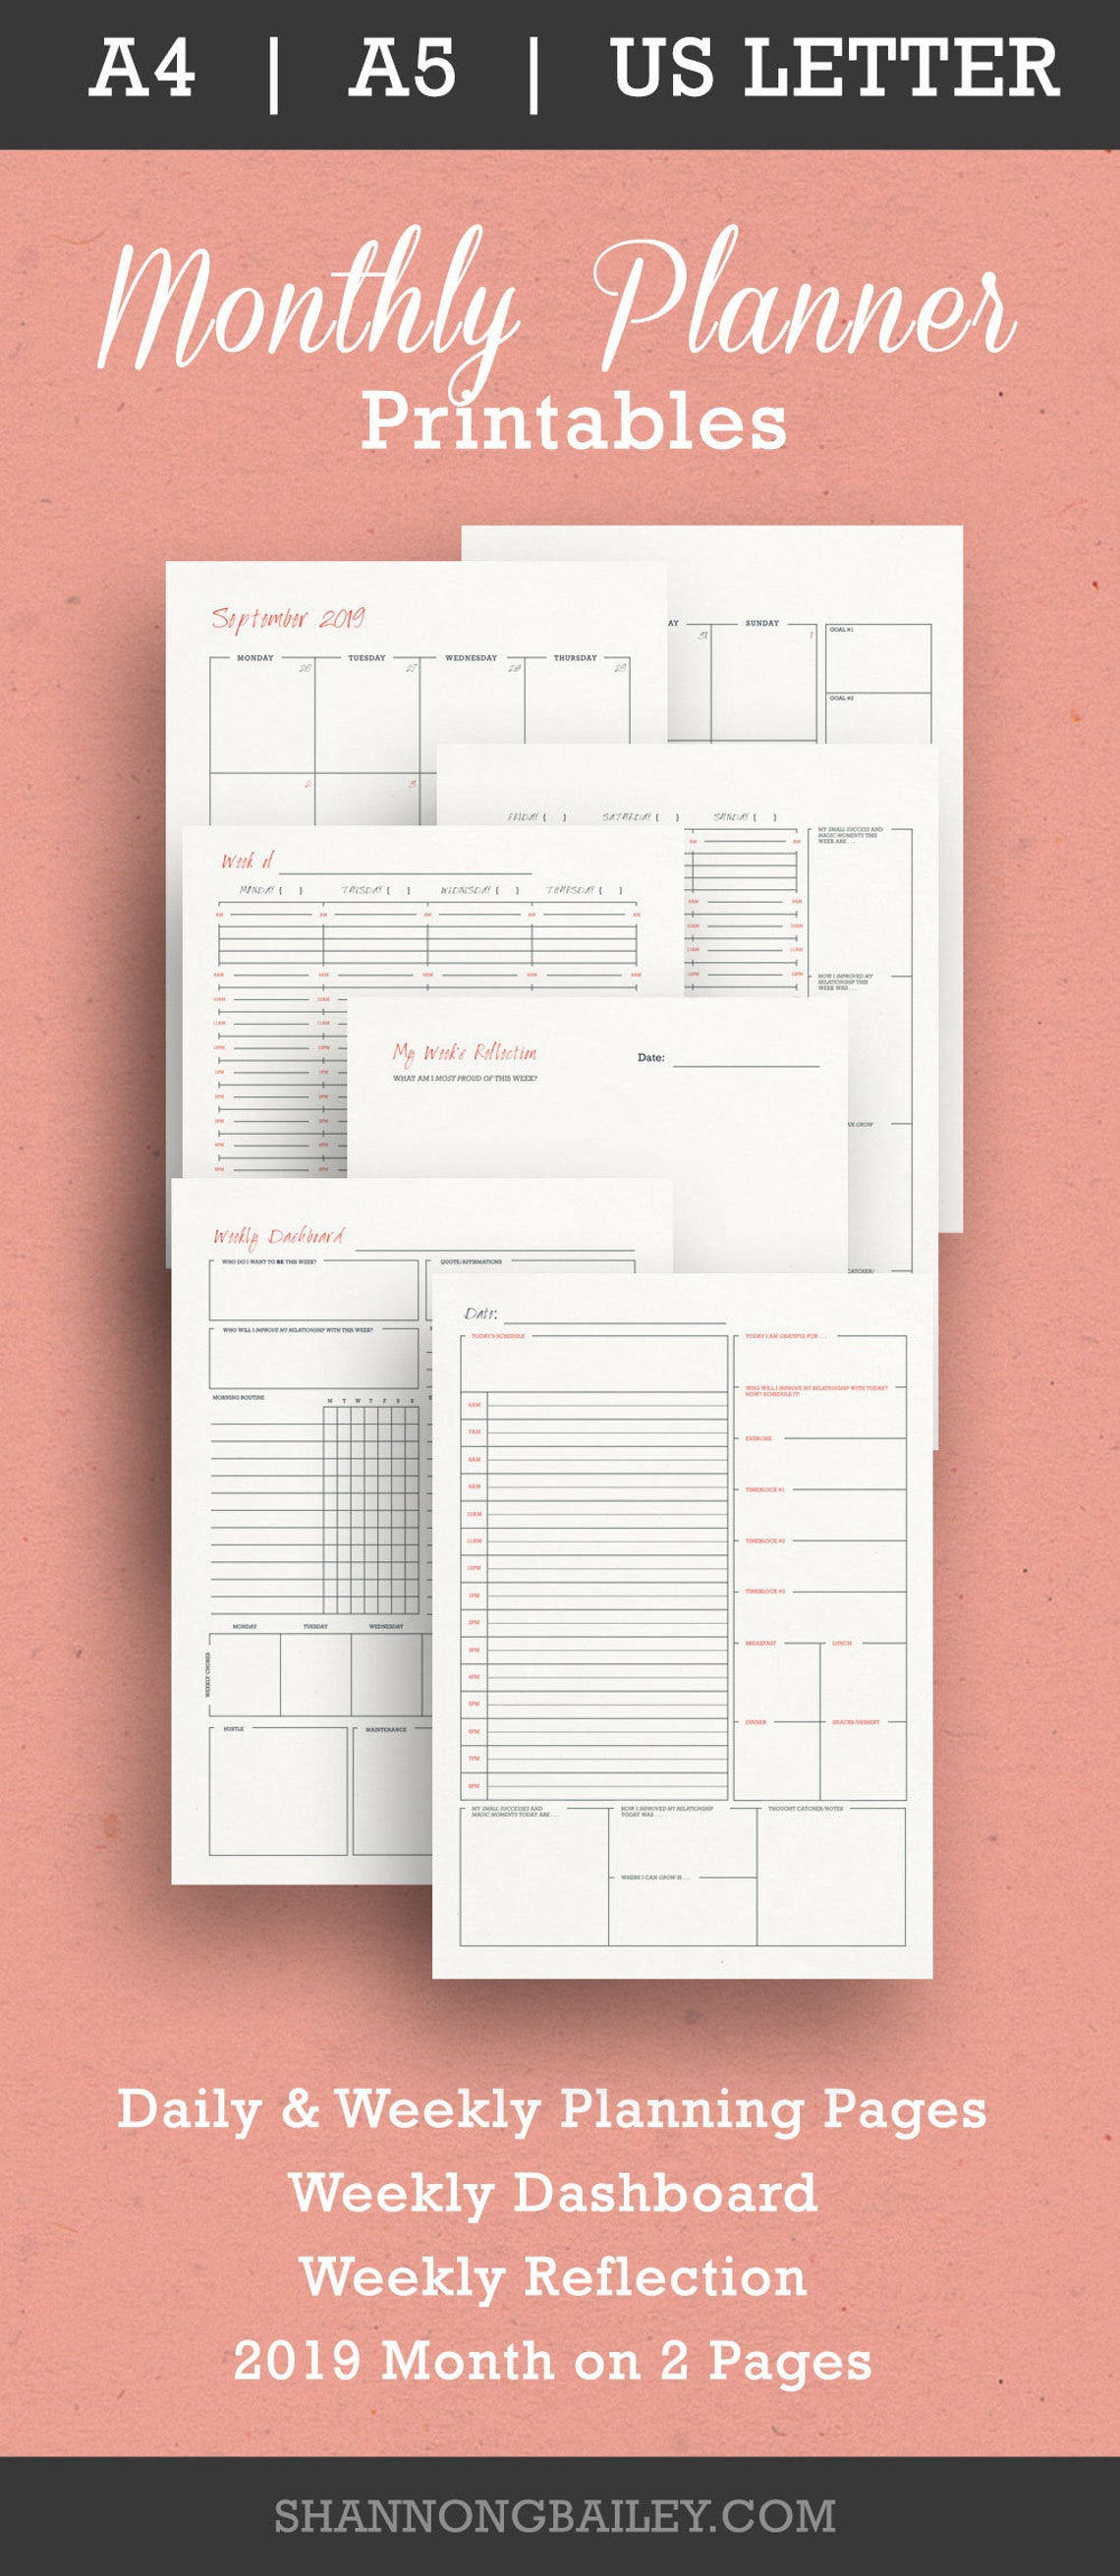 Monthly Planning Printables Kit Instant Download A4 A5 US - Etsy